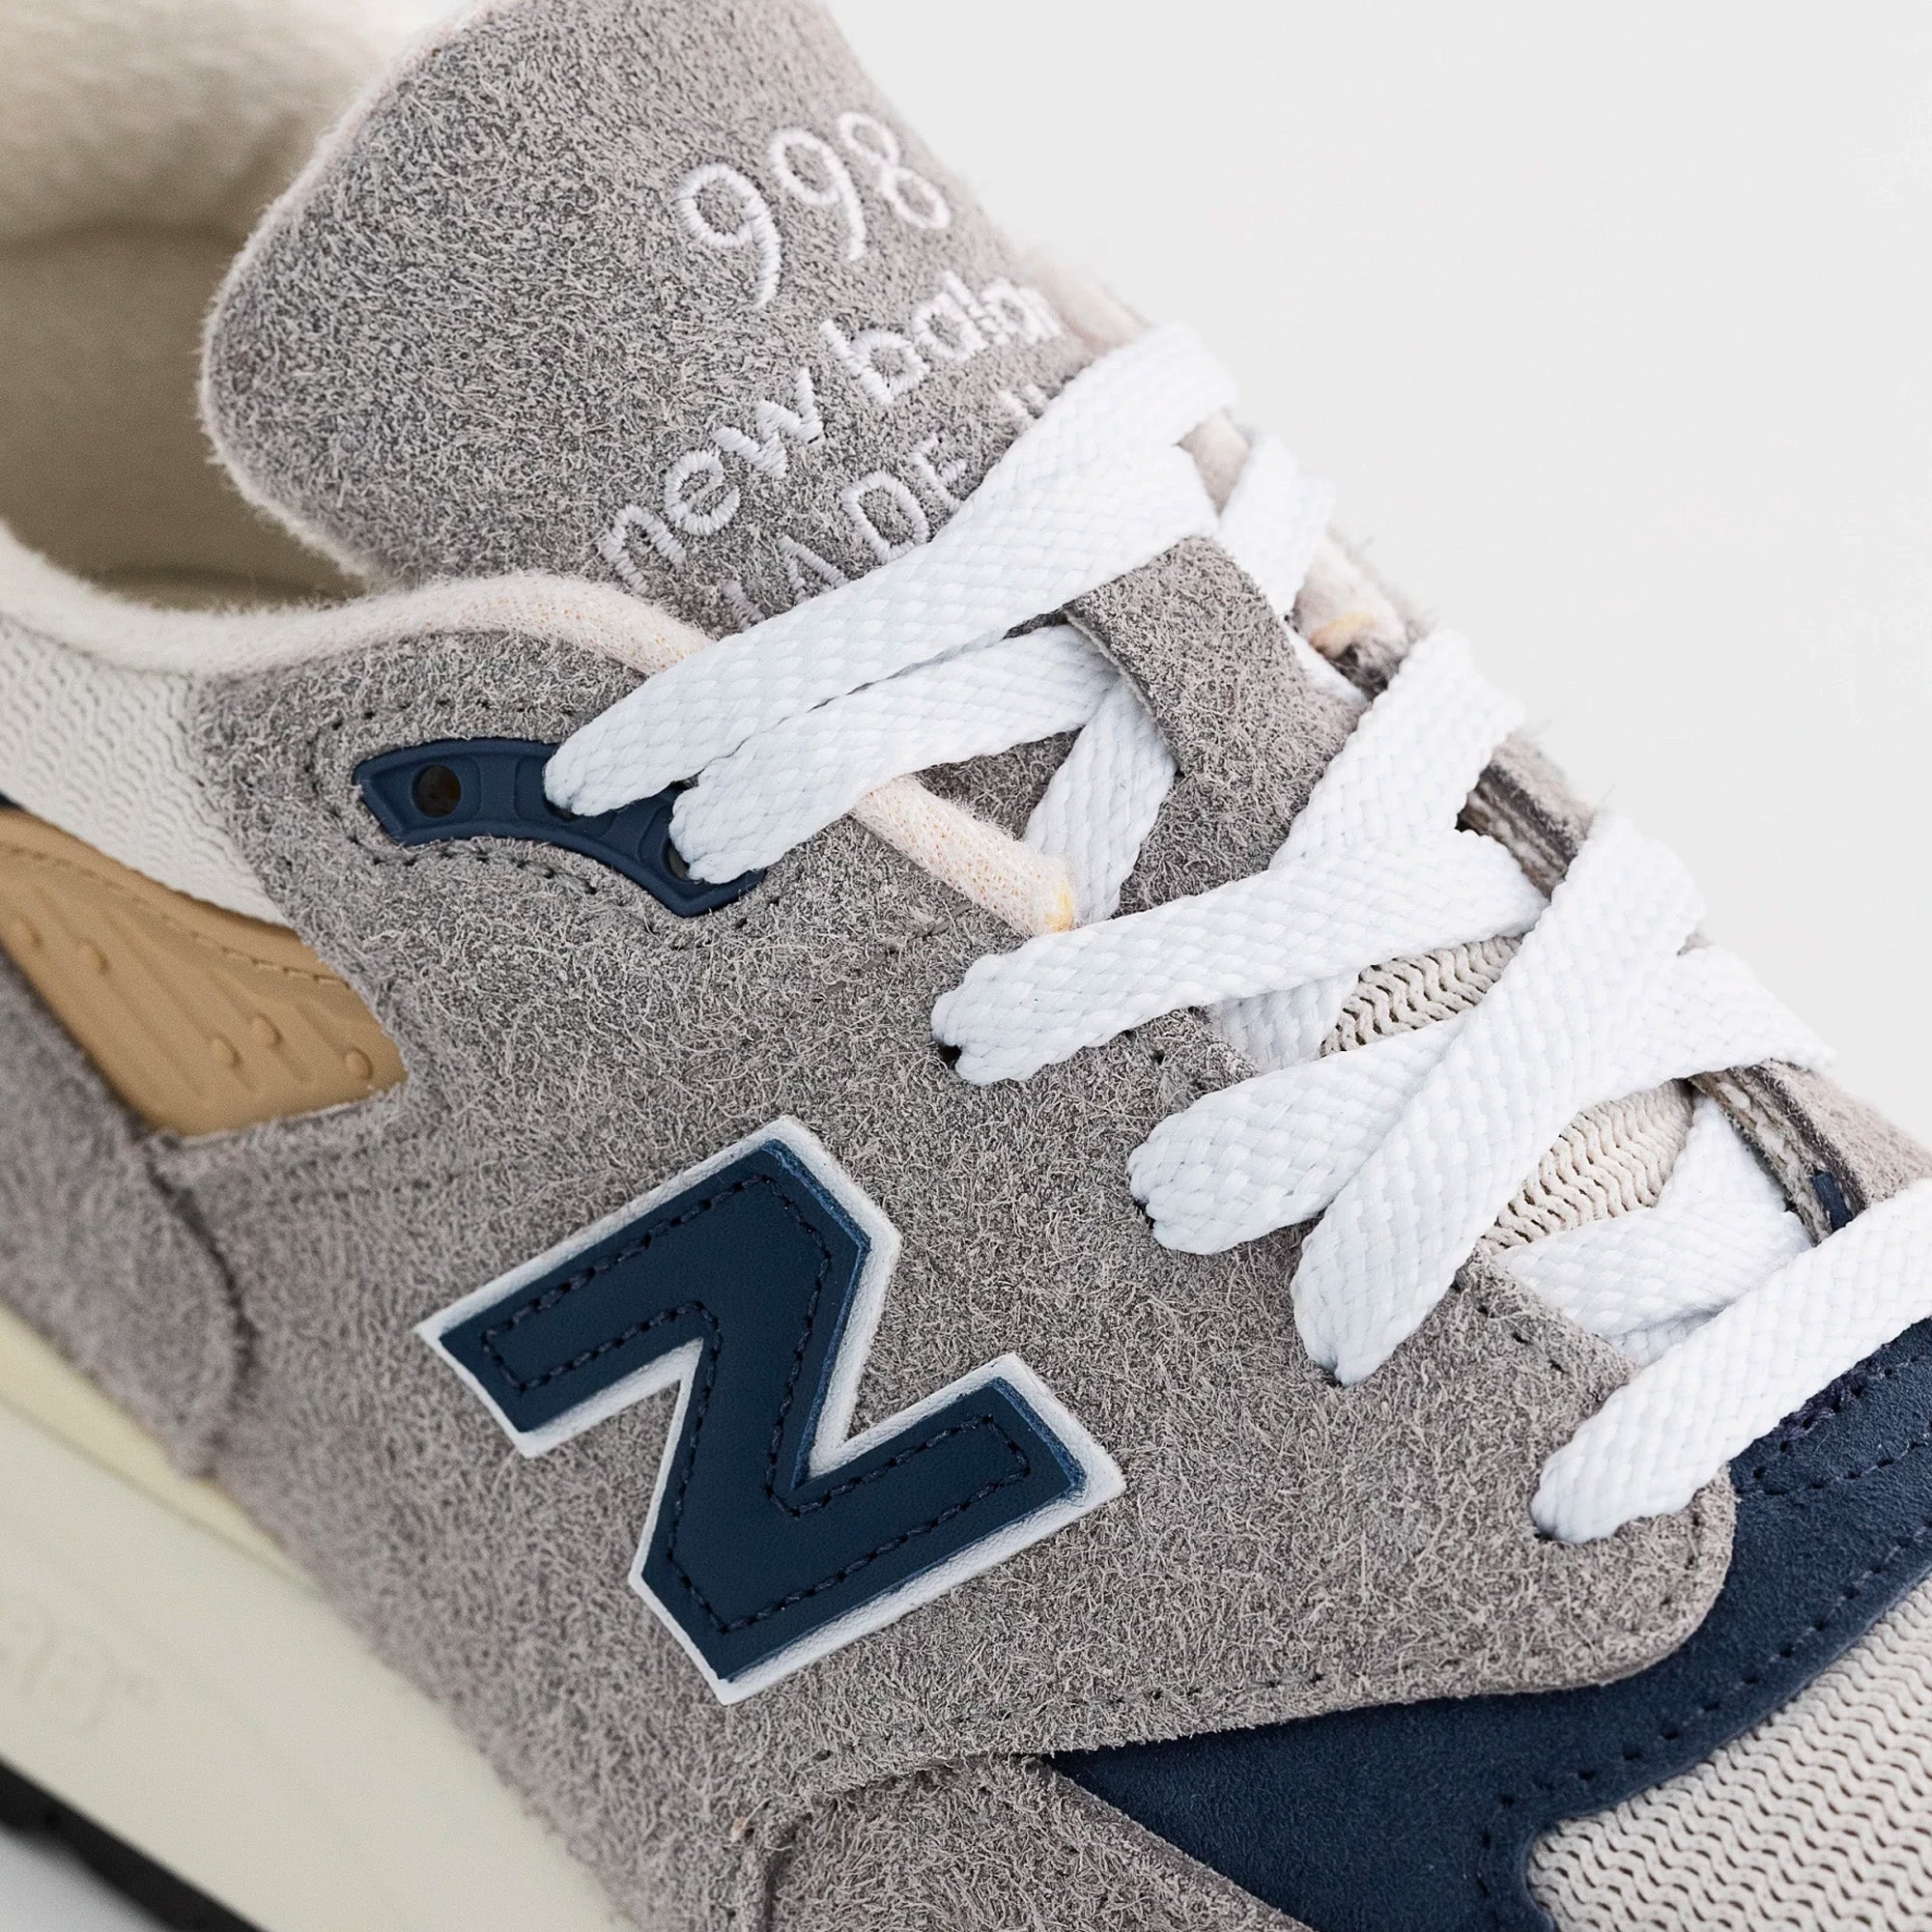 New Balance Made In USA 998 Shoes